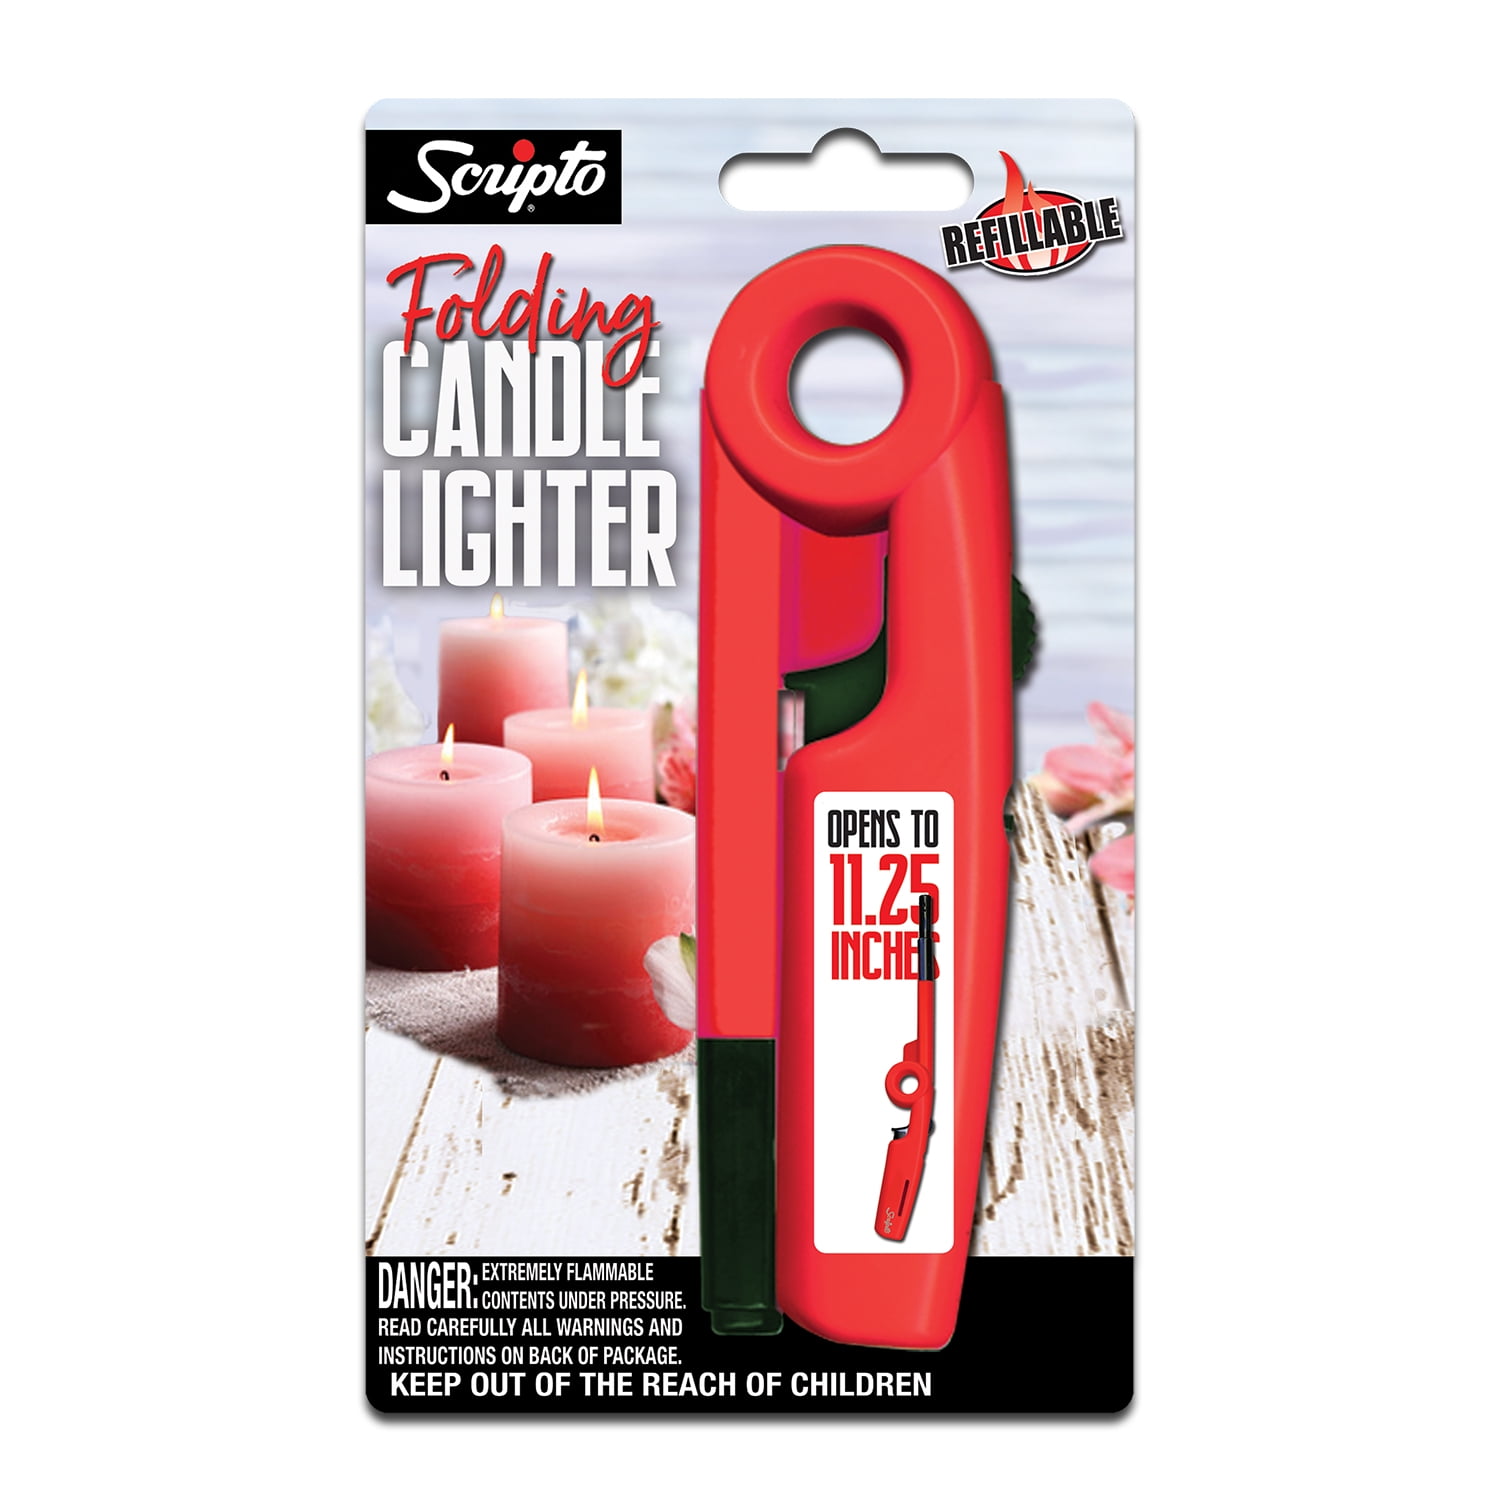 Refillable Folding Candle Lighter, Count, Red Walmart.com